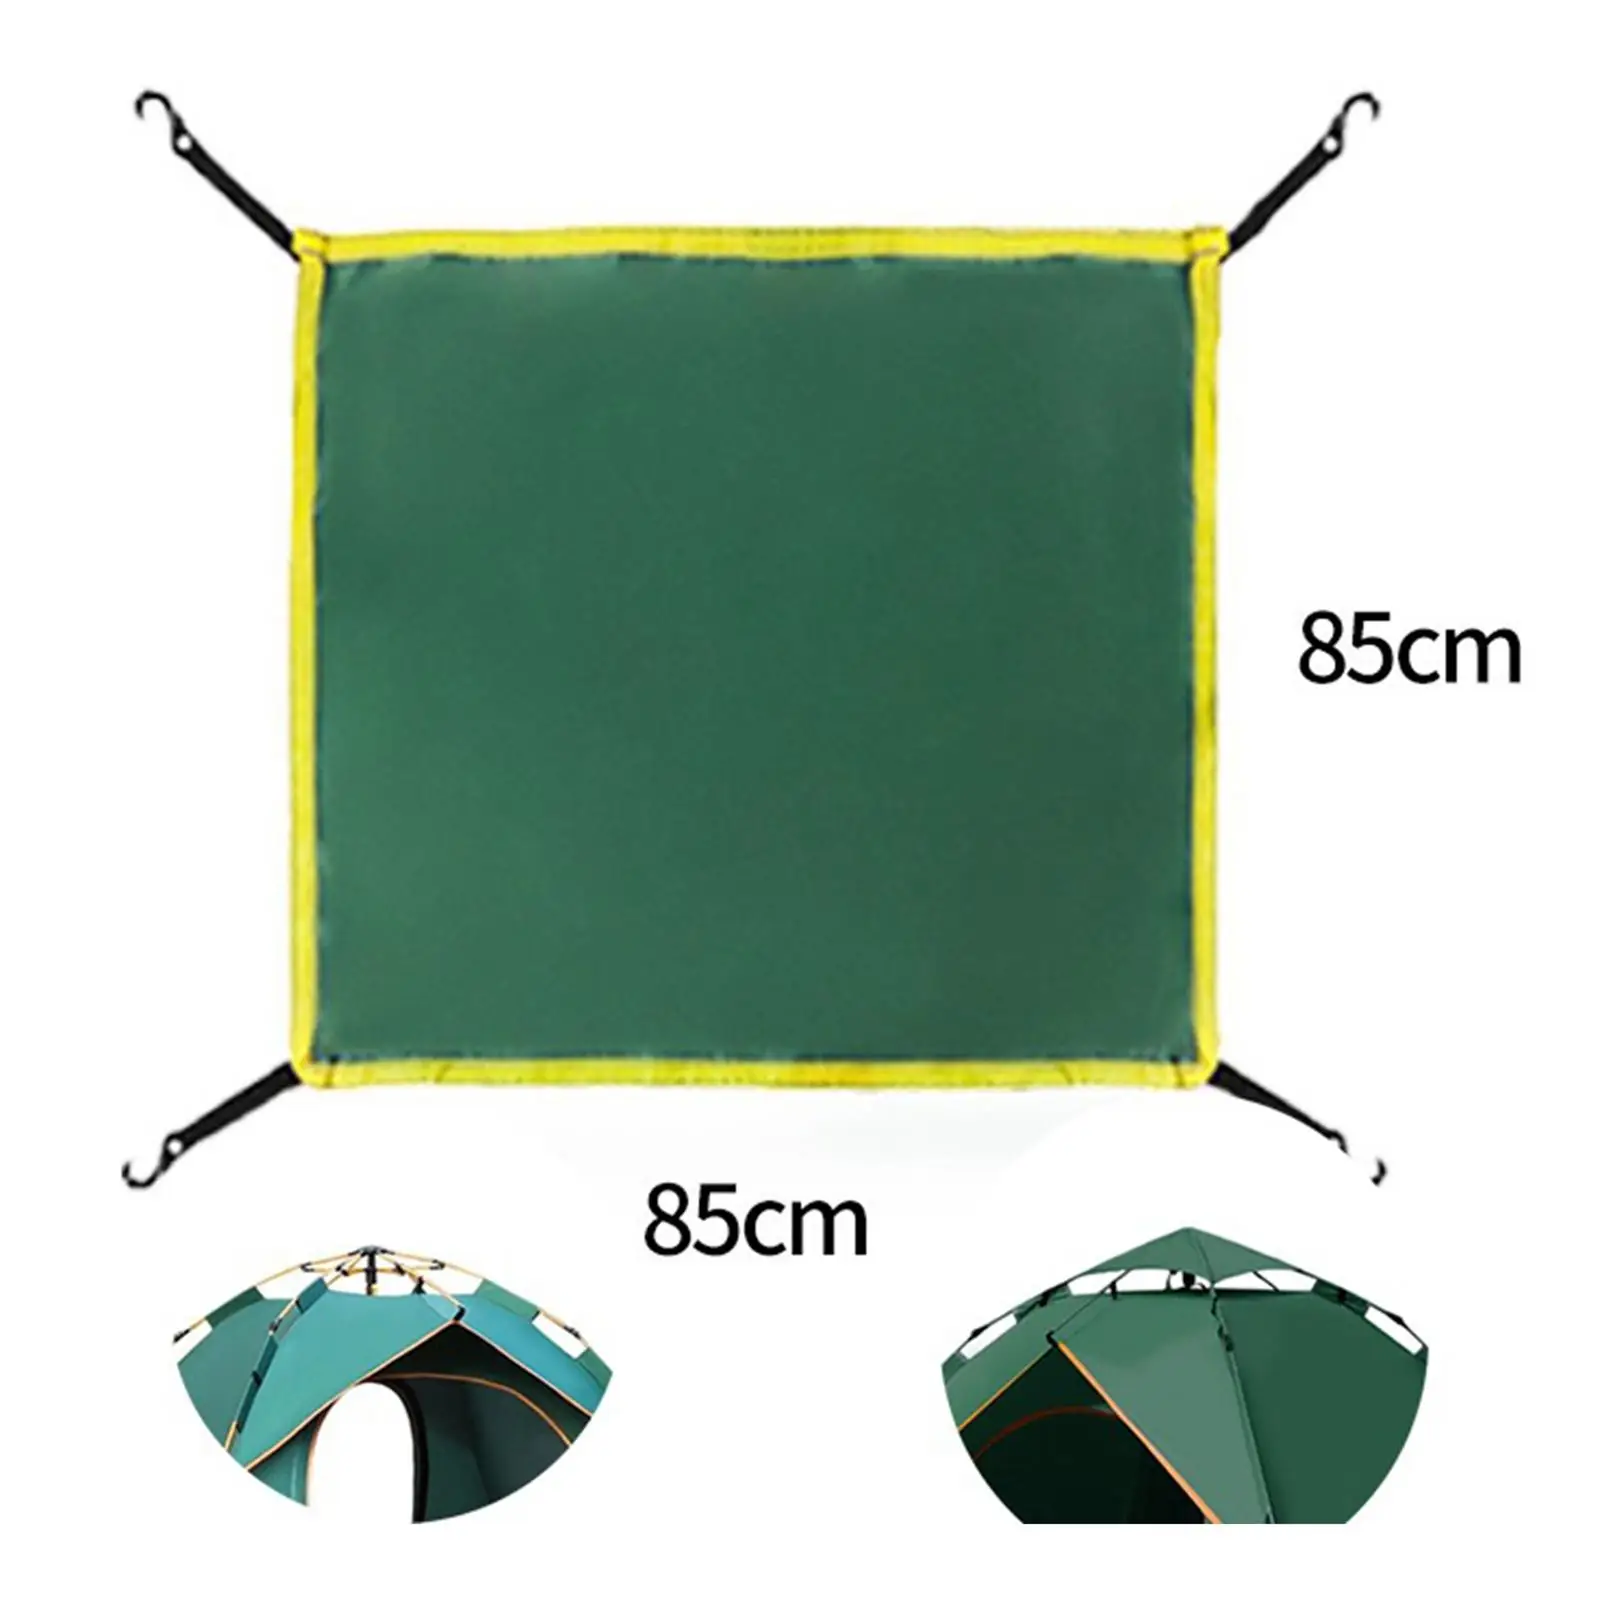 Tent Top Cover Backpacking Hiking Tent Tarp Foldable Fishing Dome Tent Cover